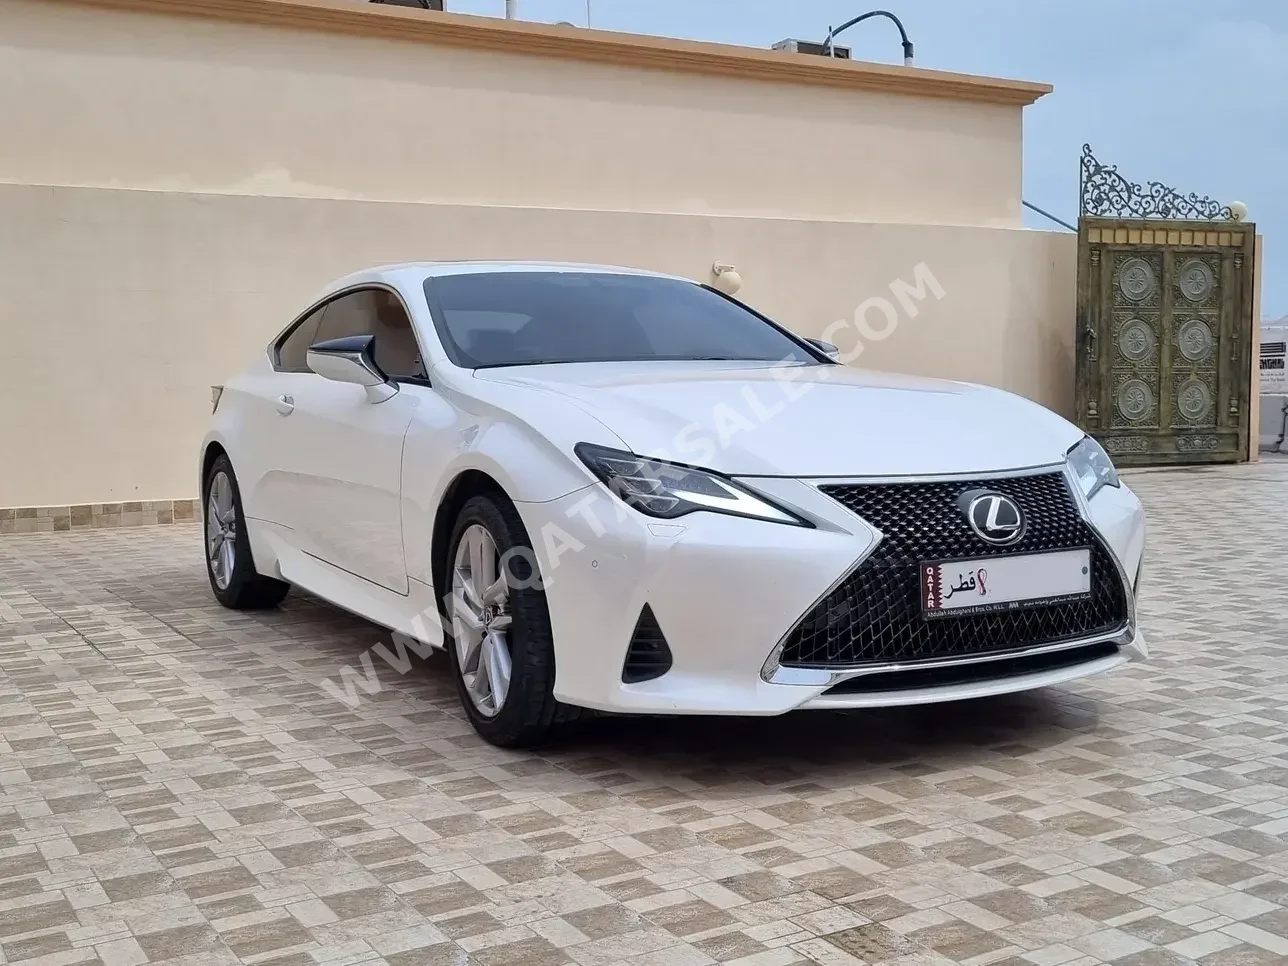 Lexus  RC  350  2022  Automatic  55,000 Km  6 Cylinder  Rear Wheel Drive (RWD)  Coupe / Sport  White  With Warranty